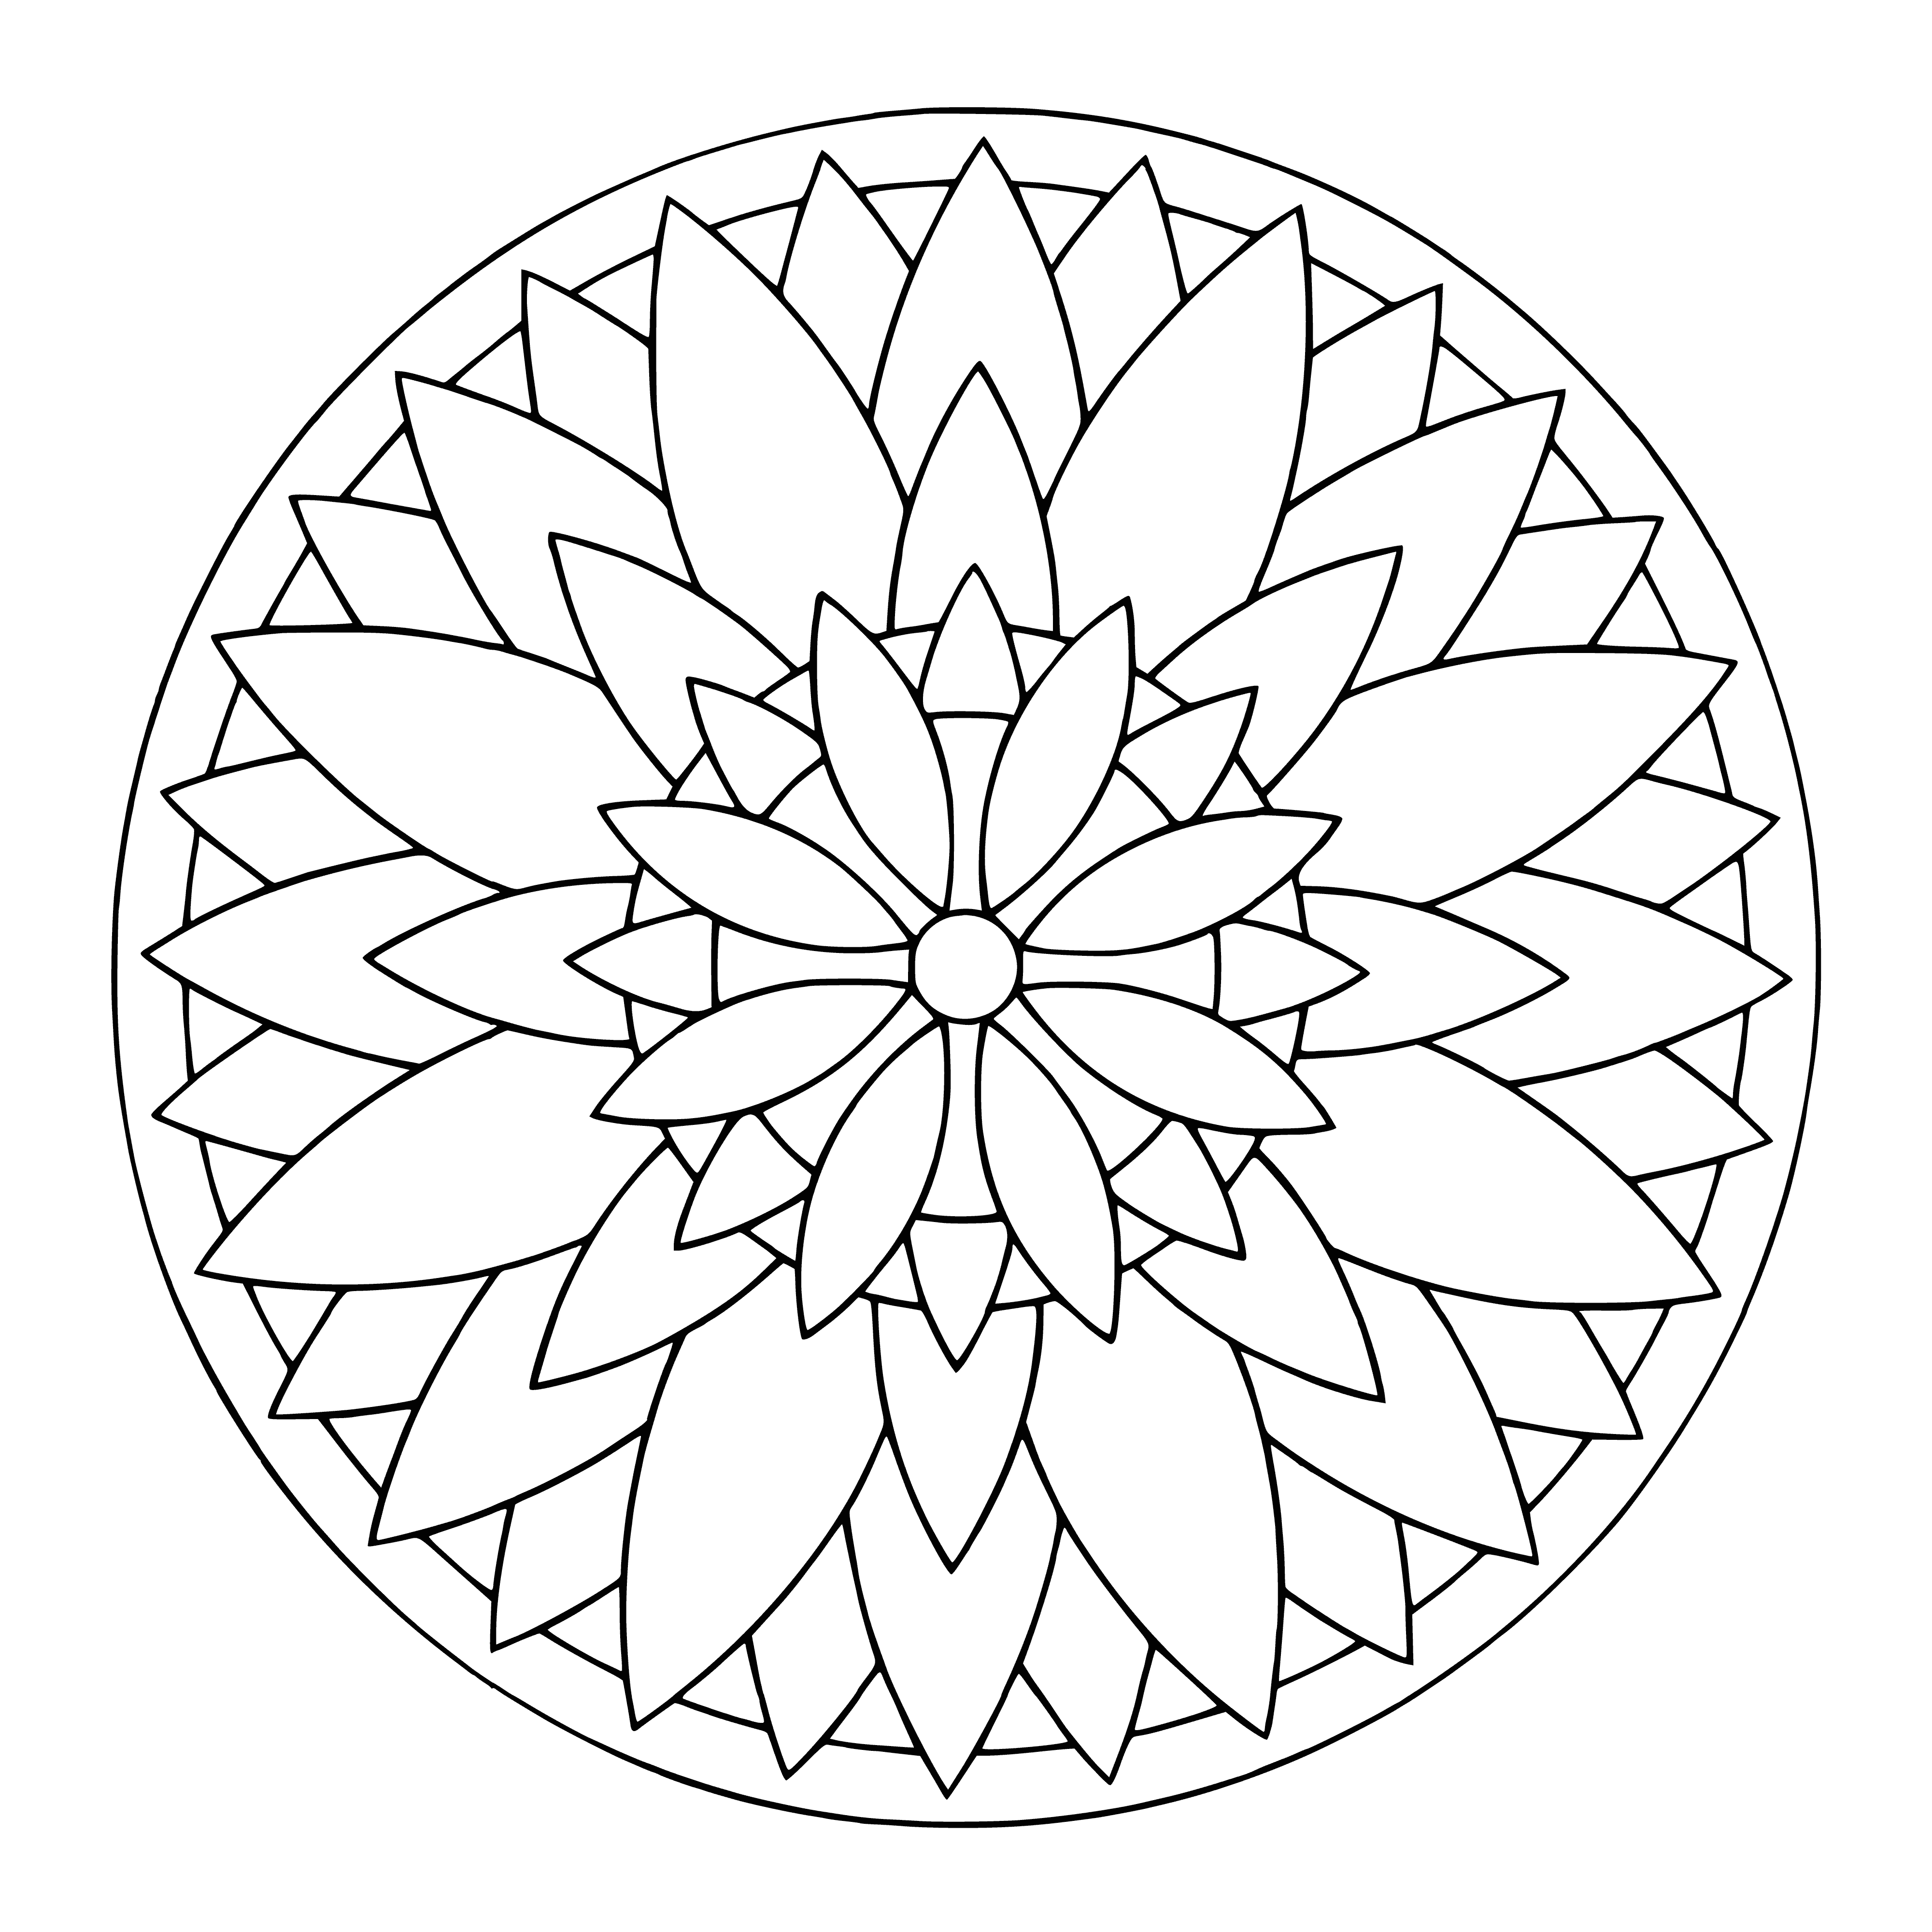 coloring page: Mandala coloring page features central circle surrounded by triangles, crosses, and diamonds, creating a complex and beautiful pattern.